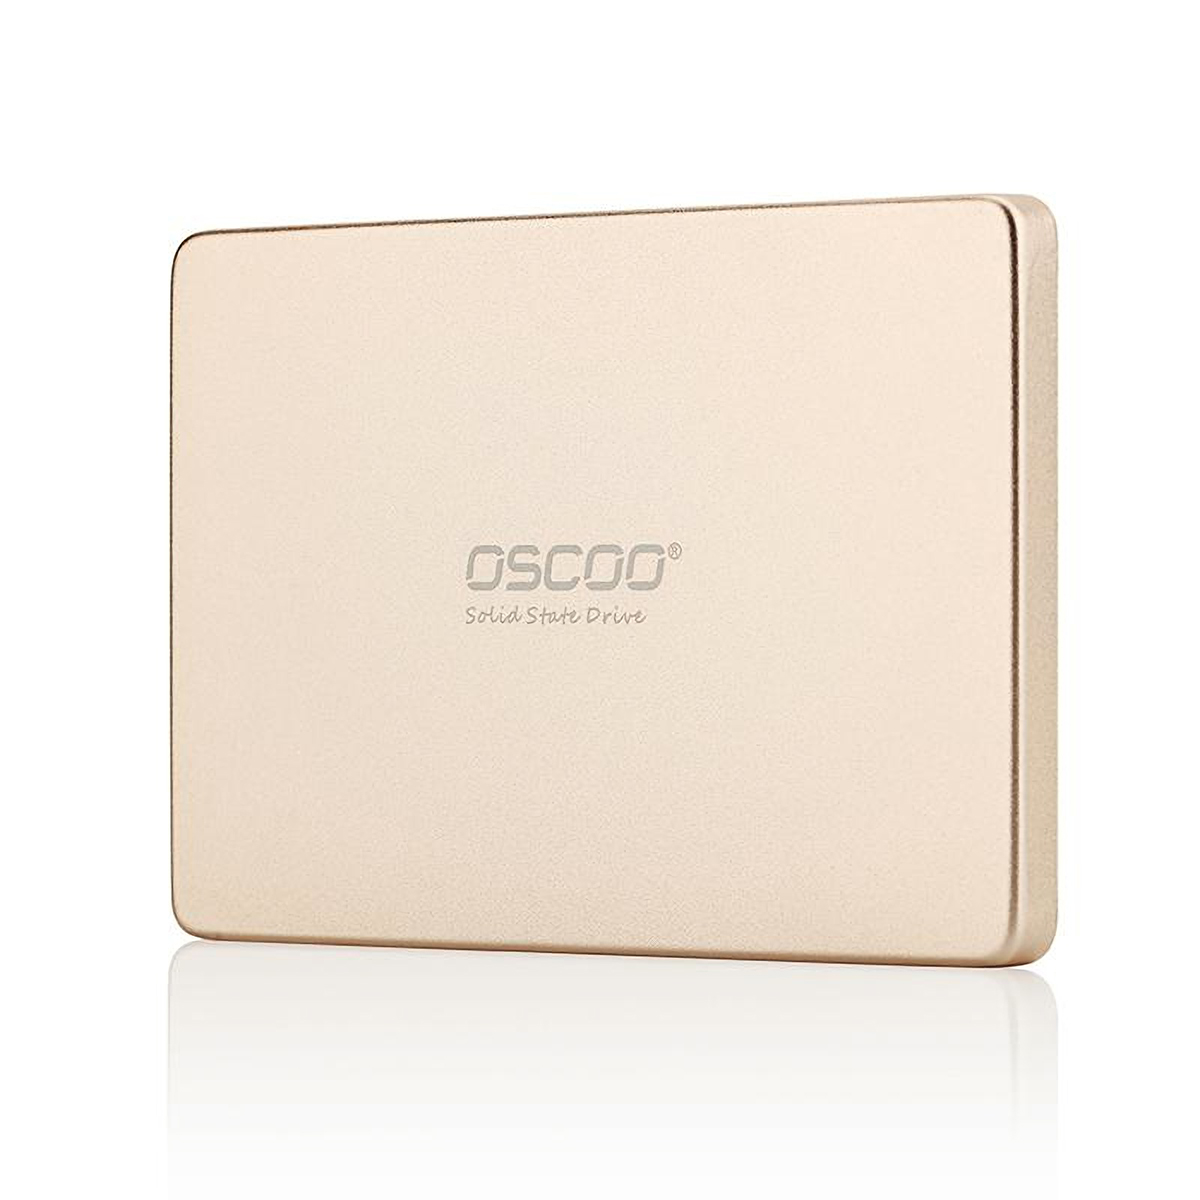 OSCOO-64GB-25-inch-SATA3-SSD-Solid-State-Drive-Aluminium-alloy-Internal-Hard-Disk-Support-TRIM-1296343-7